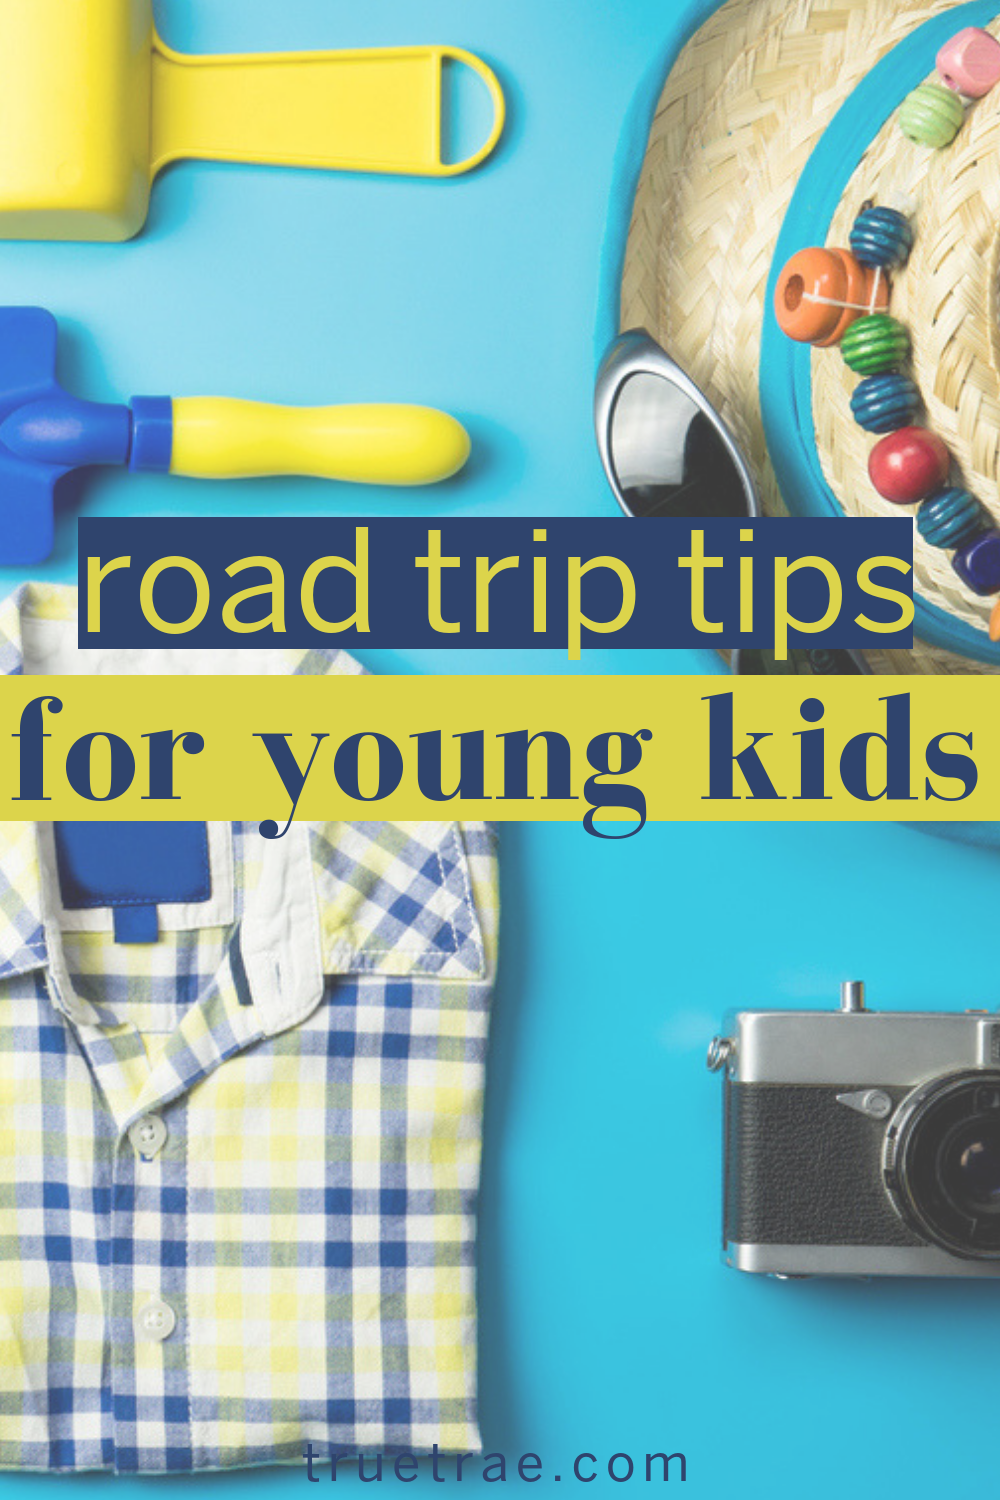 Need road trip ideas for kids? These family vacation tips will help you entertain your kids on a car trip. #roadtrip #kidstips #parentingtips